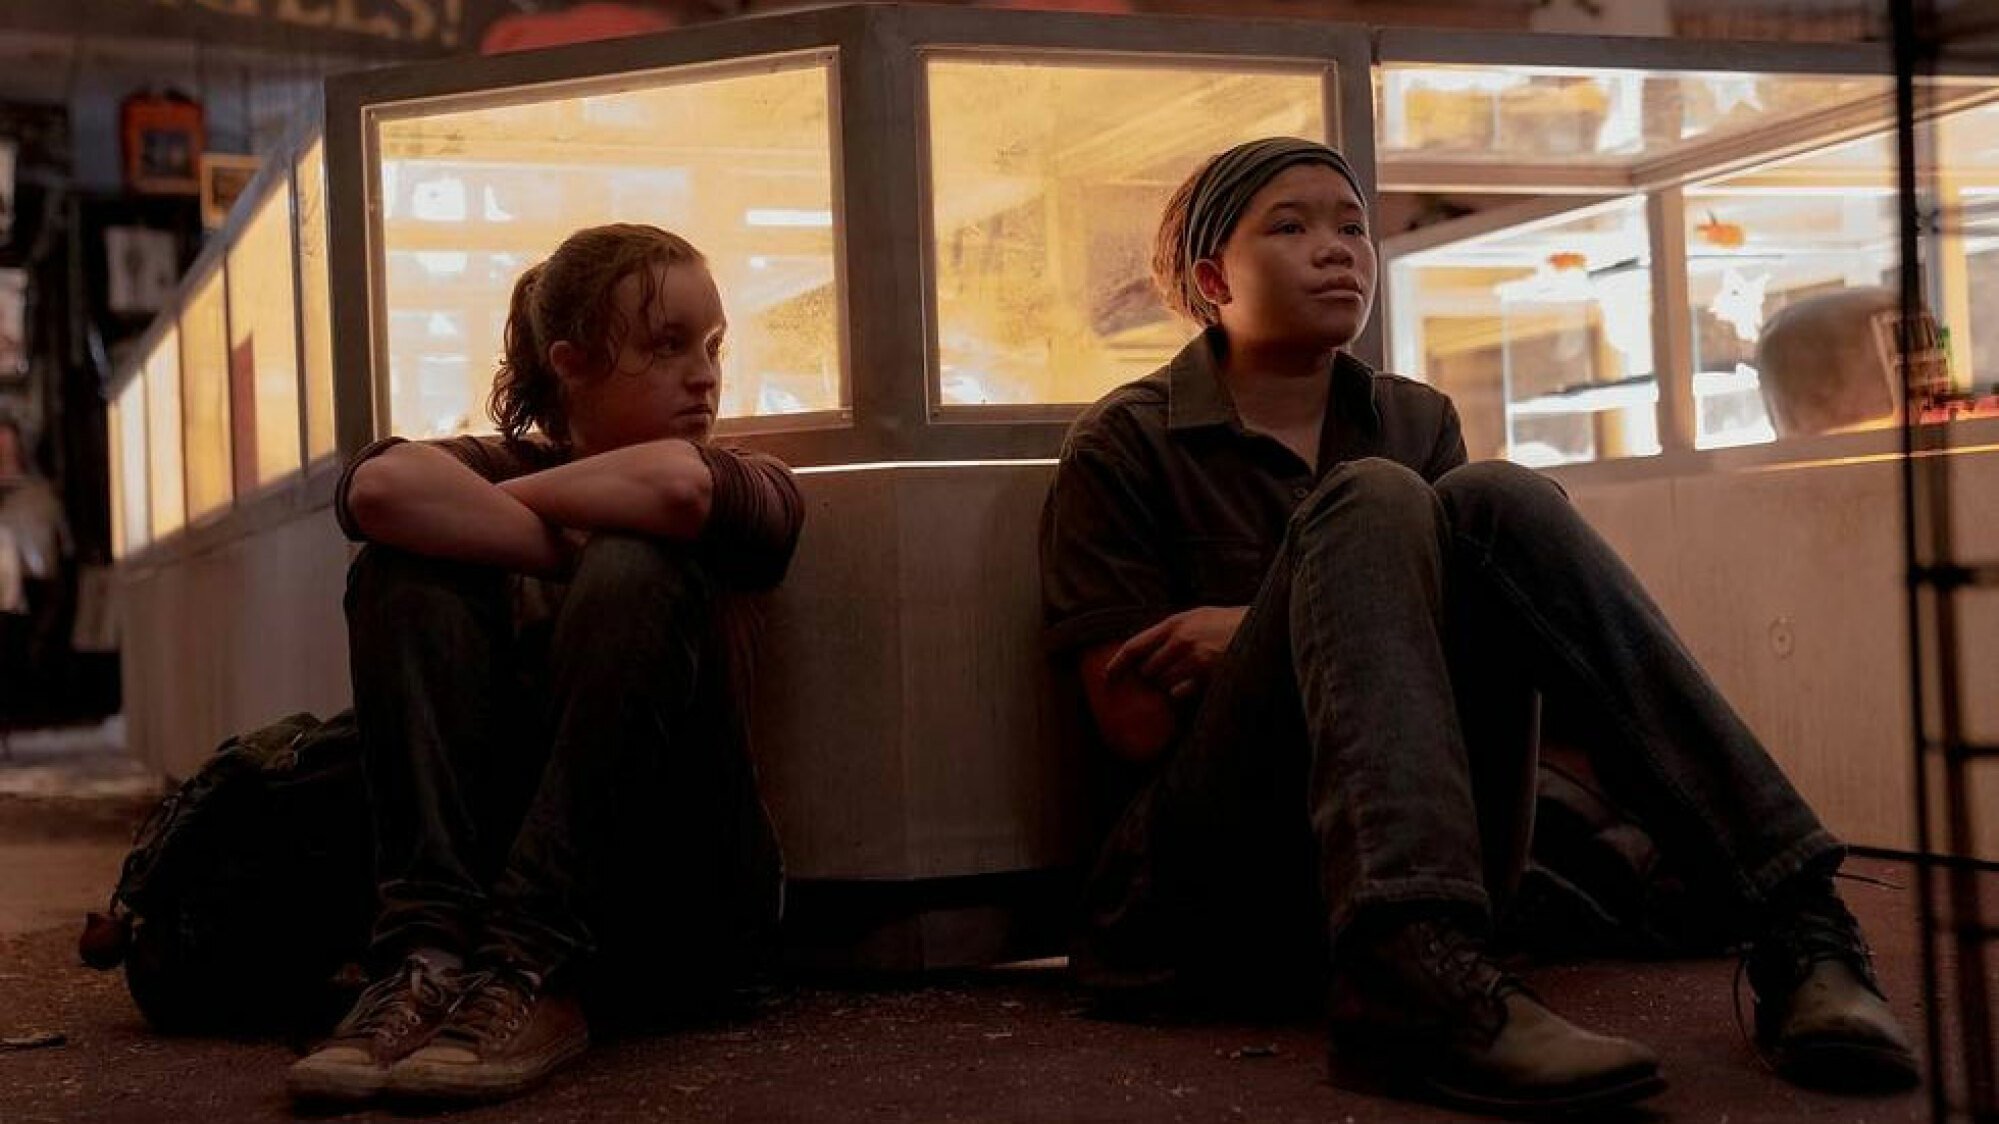 Two young girls sit down next to each other with their backs against a wall.